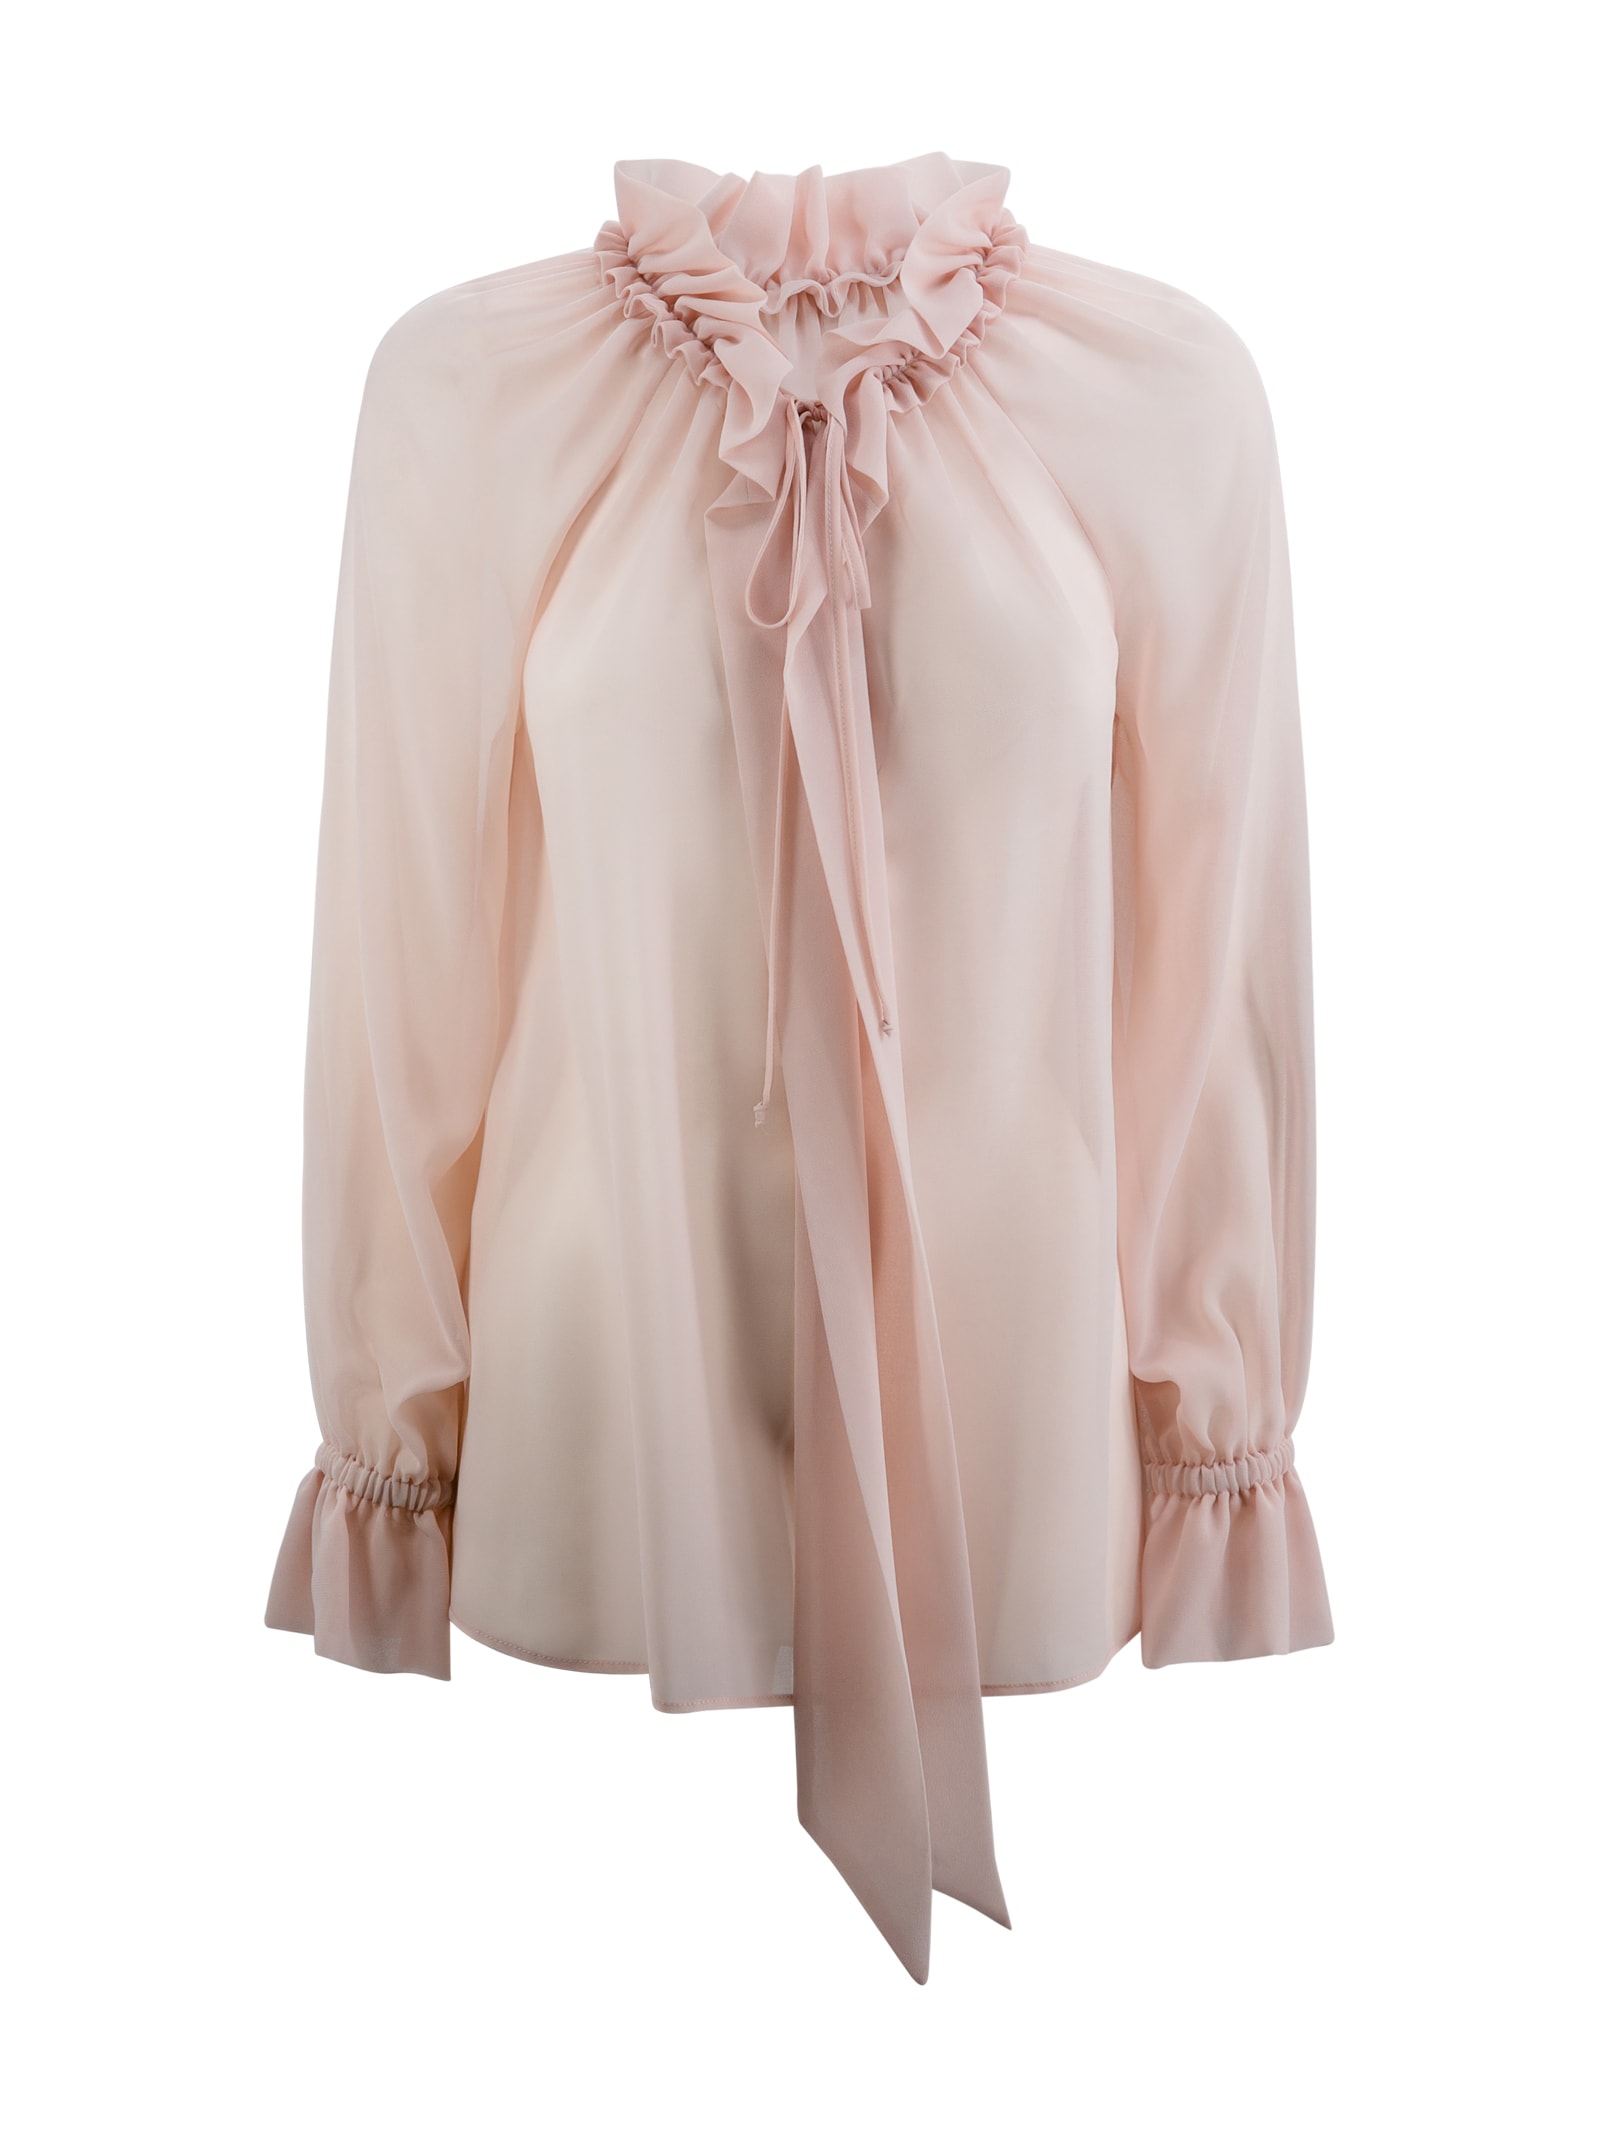 P.A.R.O.S.H SHEER GEORGETTE BLOUSE